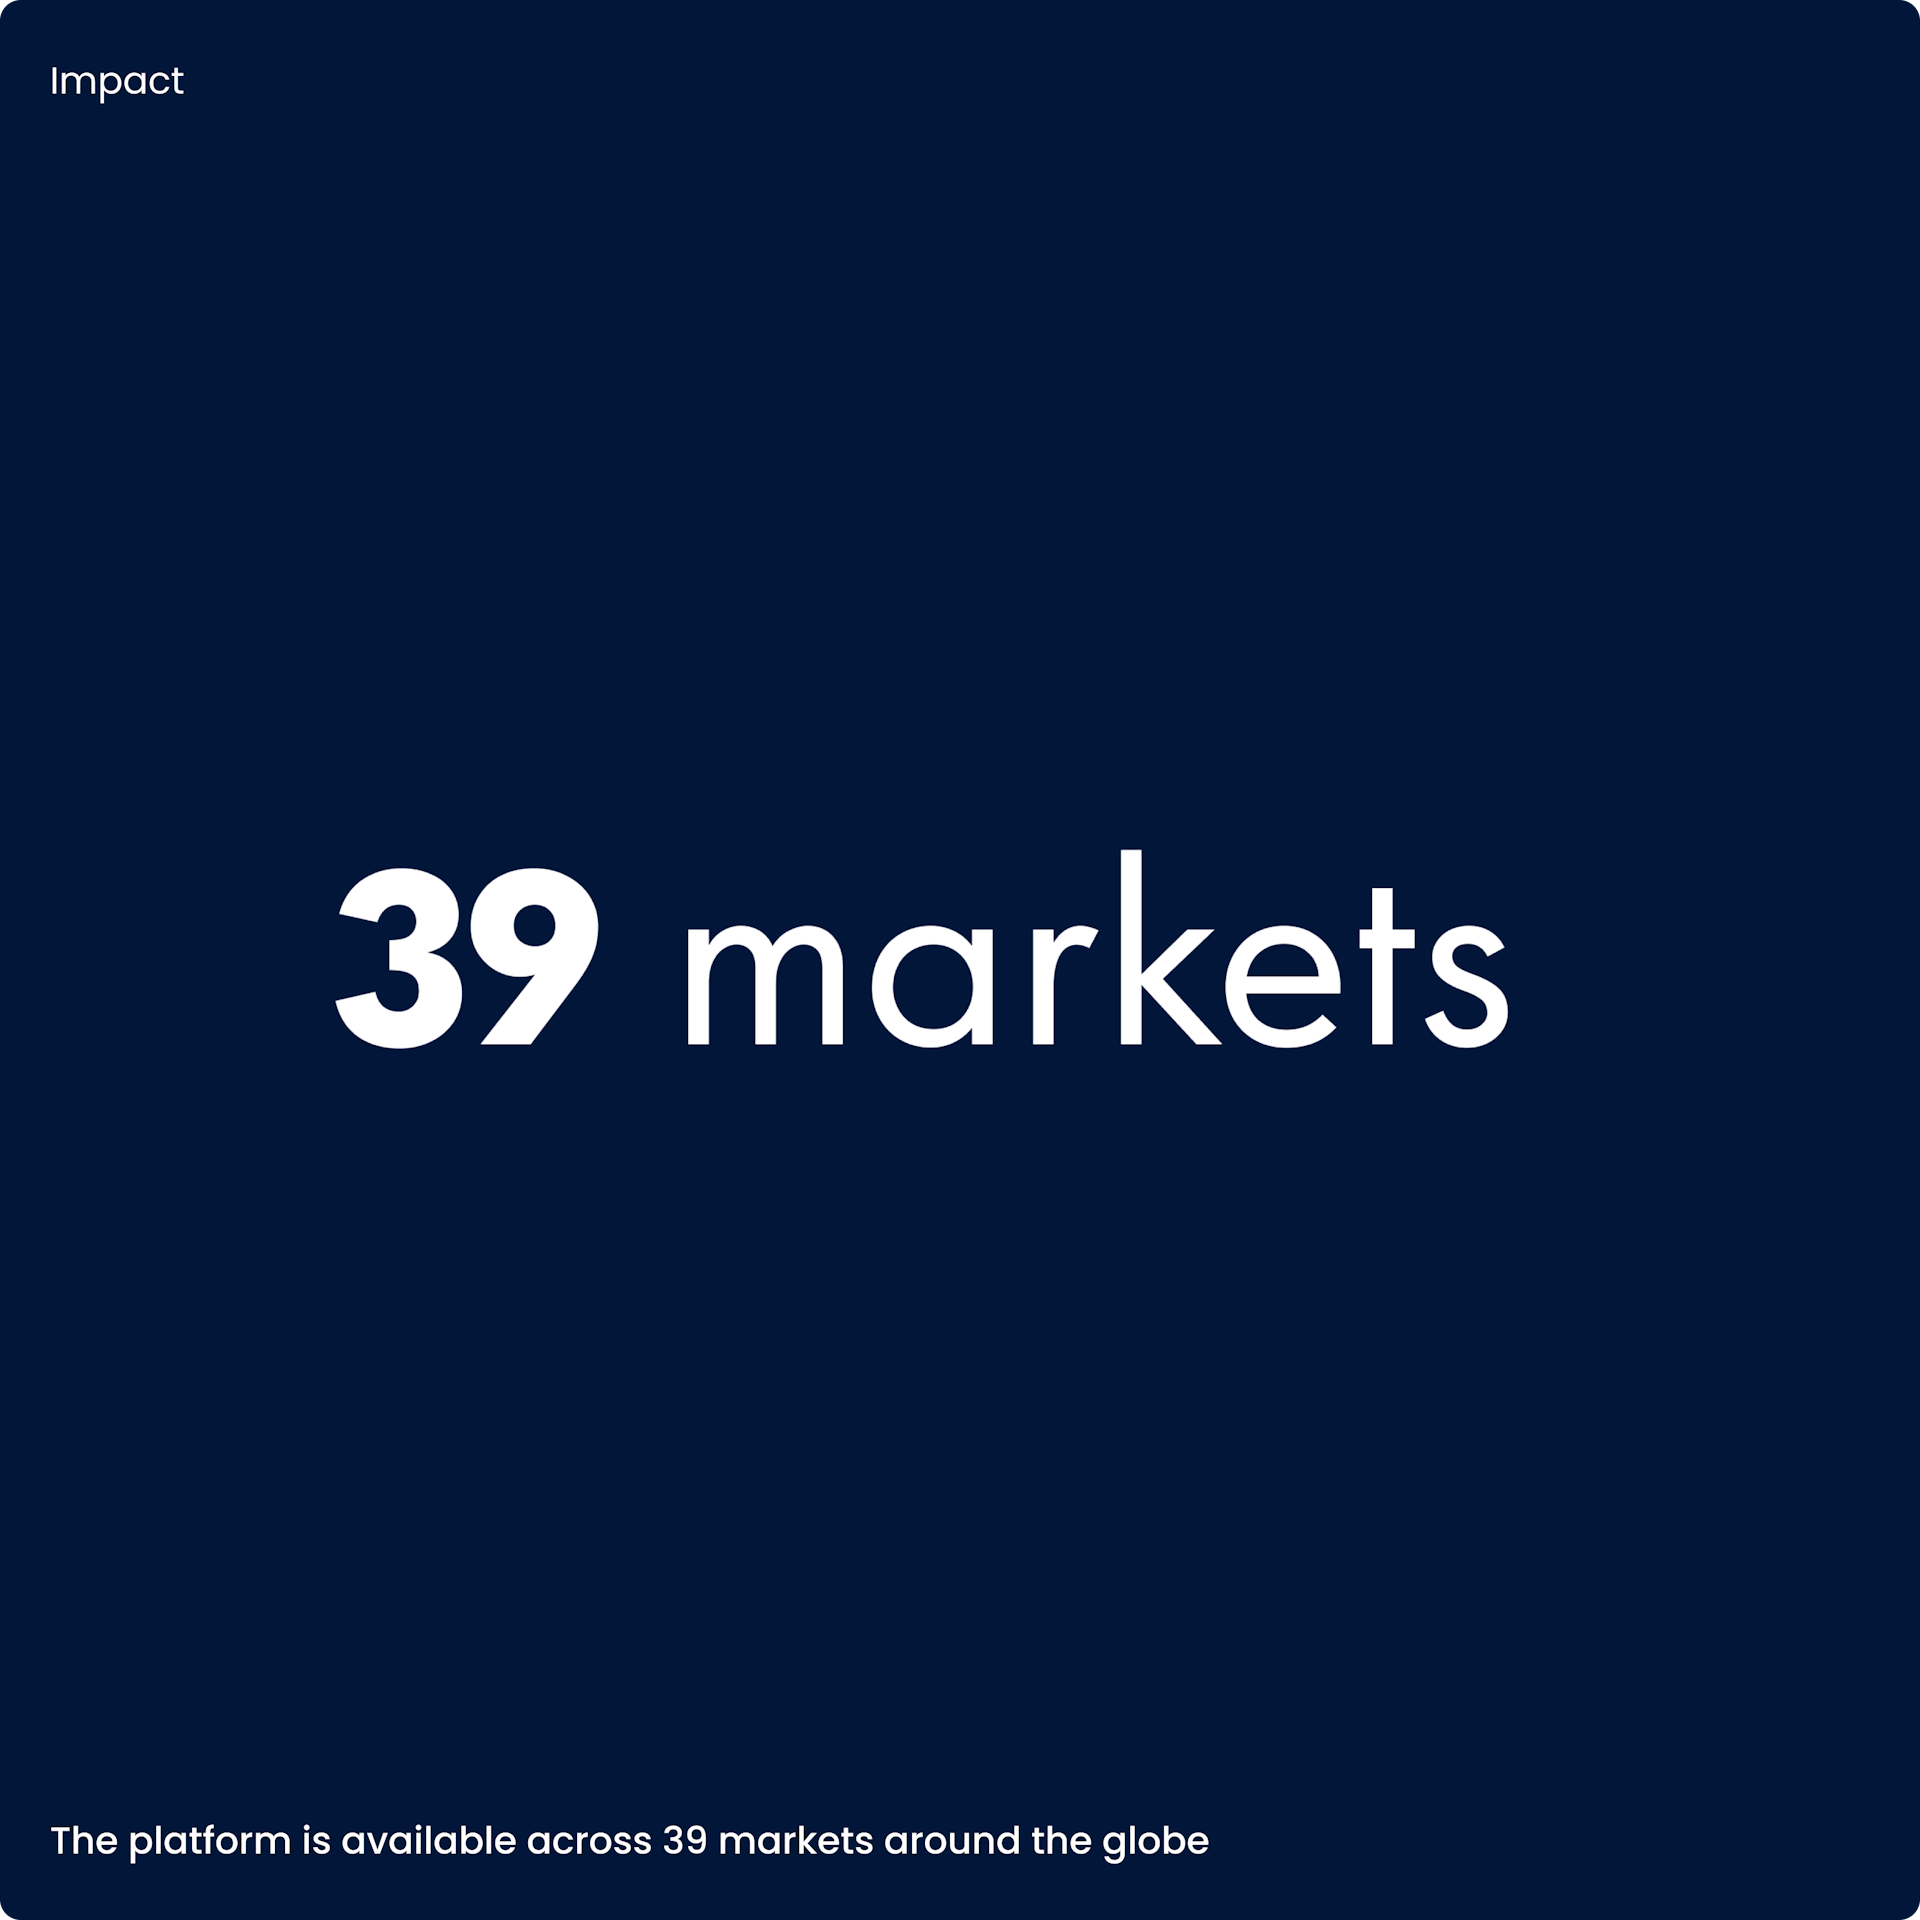 On a dark navy background, white letters say "39 markets"